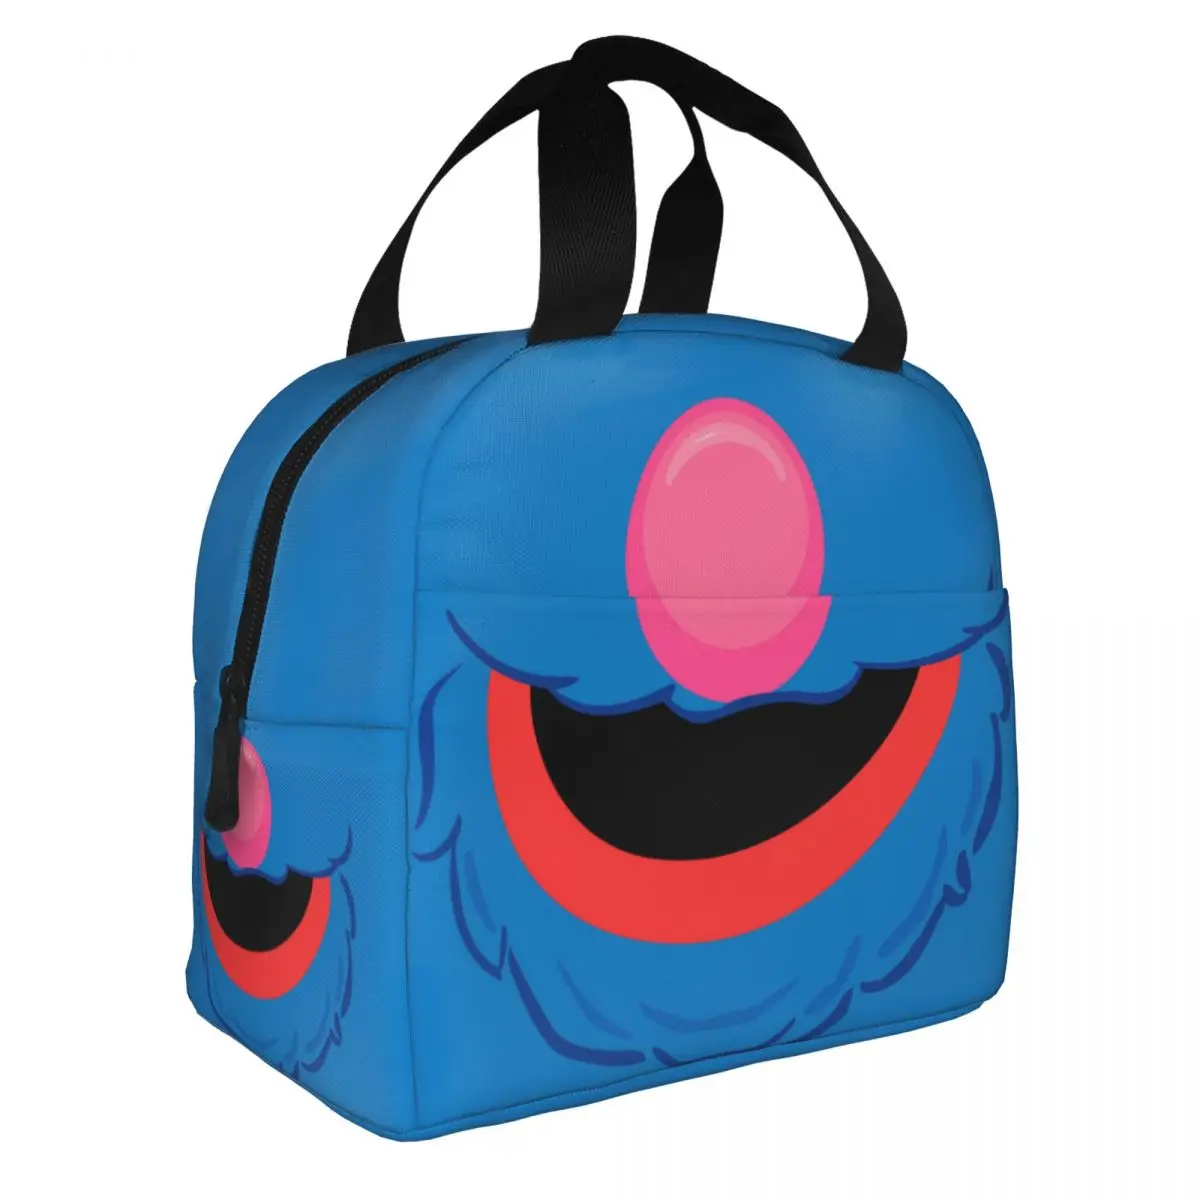 

Blue Friend Sesame Street Insulated Lunch Bags Portable Lunch Container Thermal Bag Tote Lunch Box Beach Picnic Bento Pouch